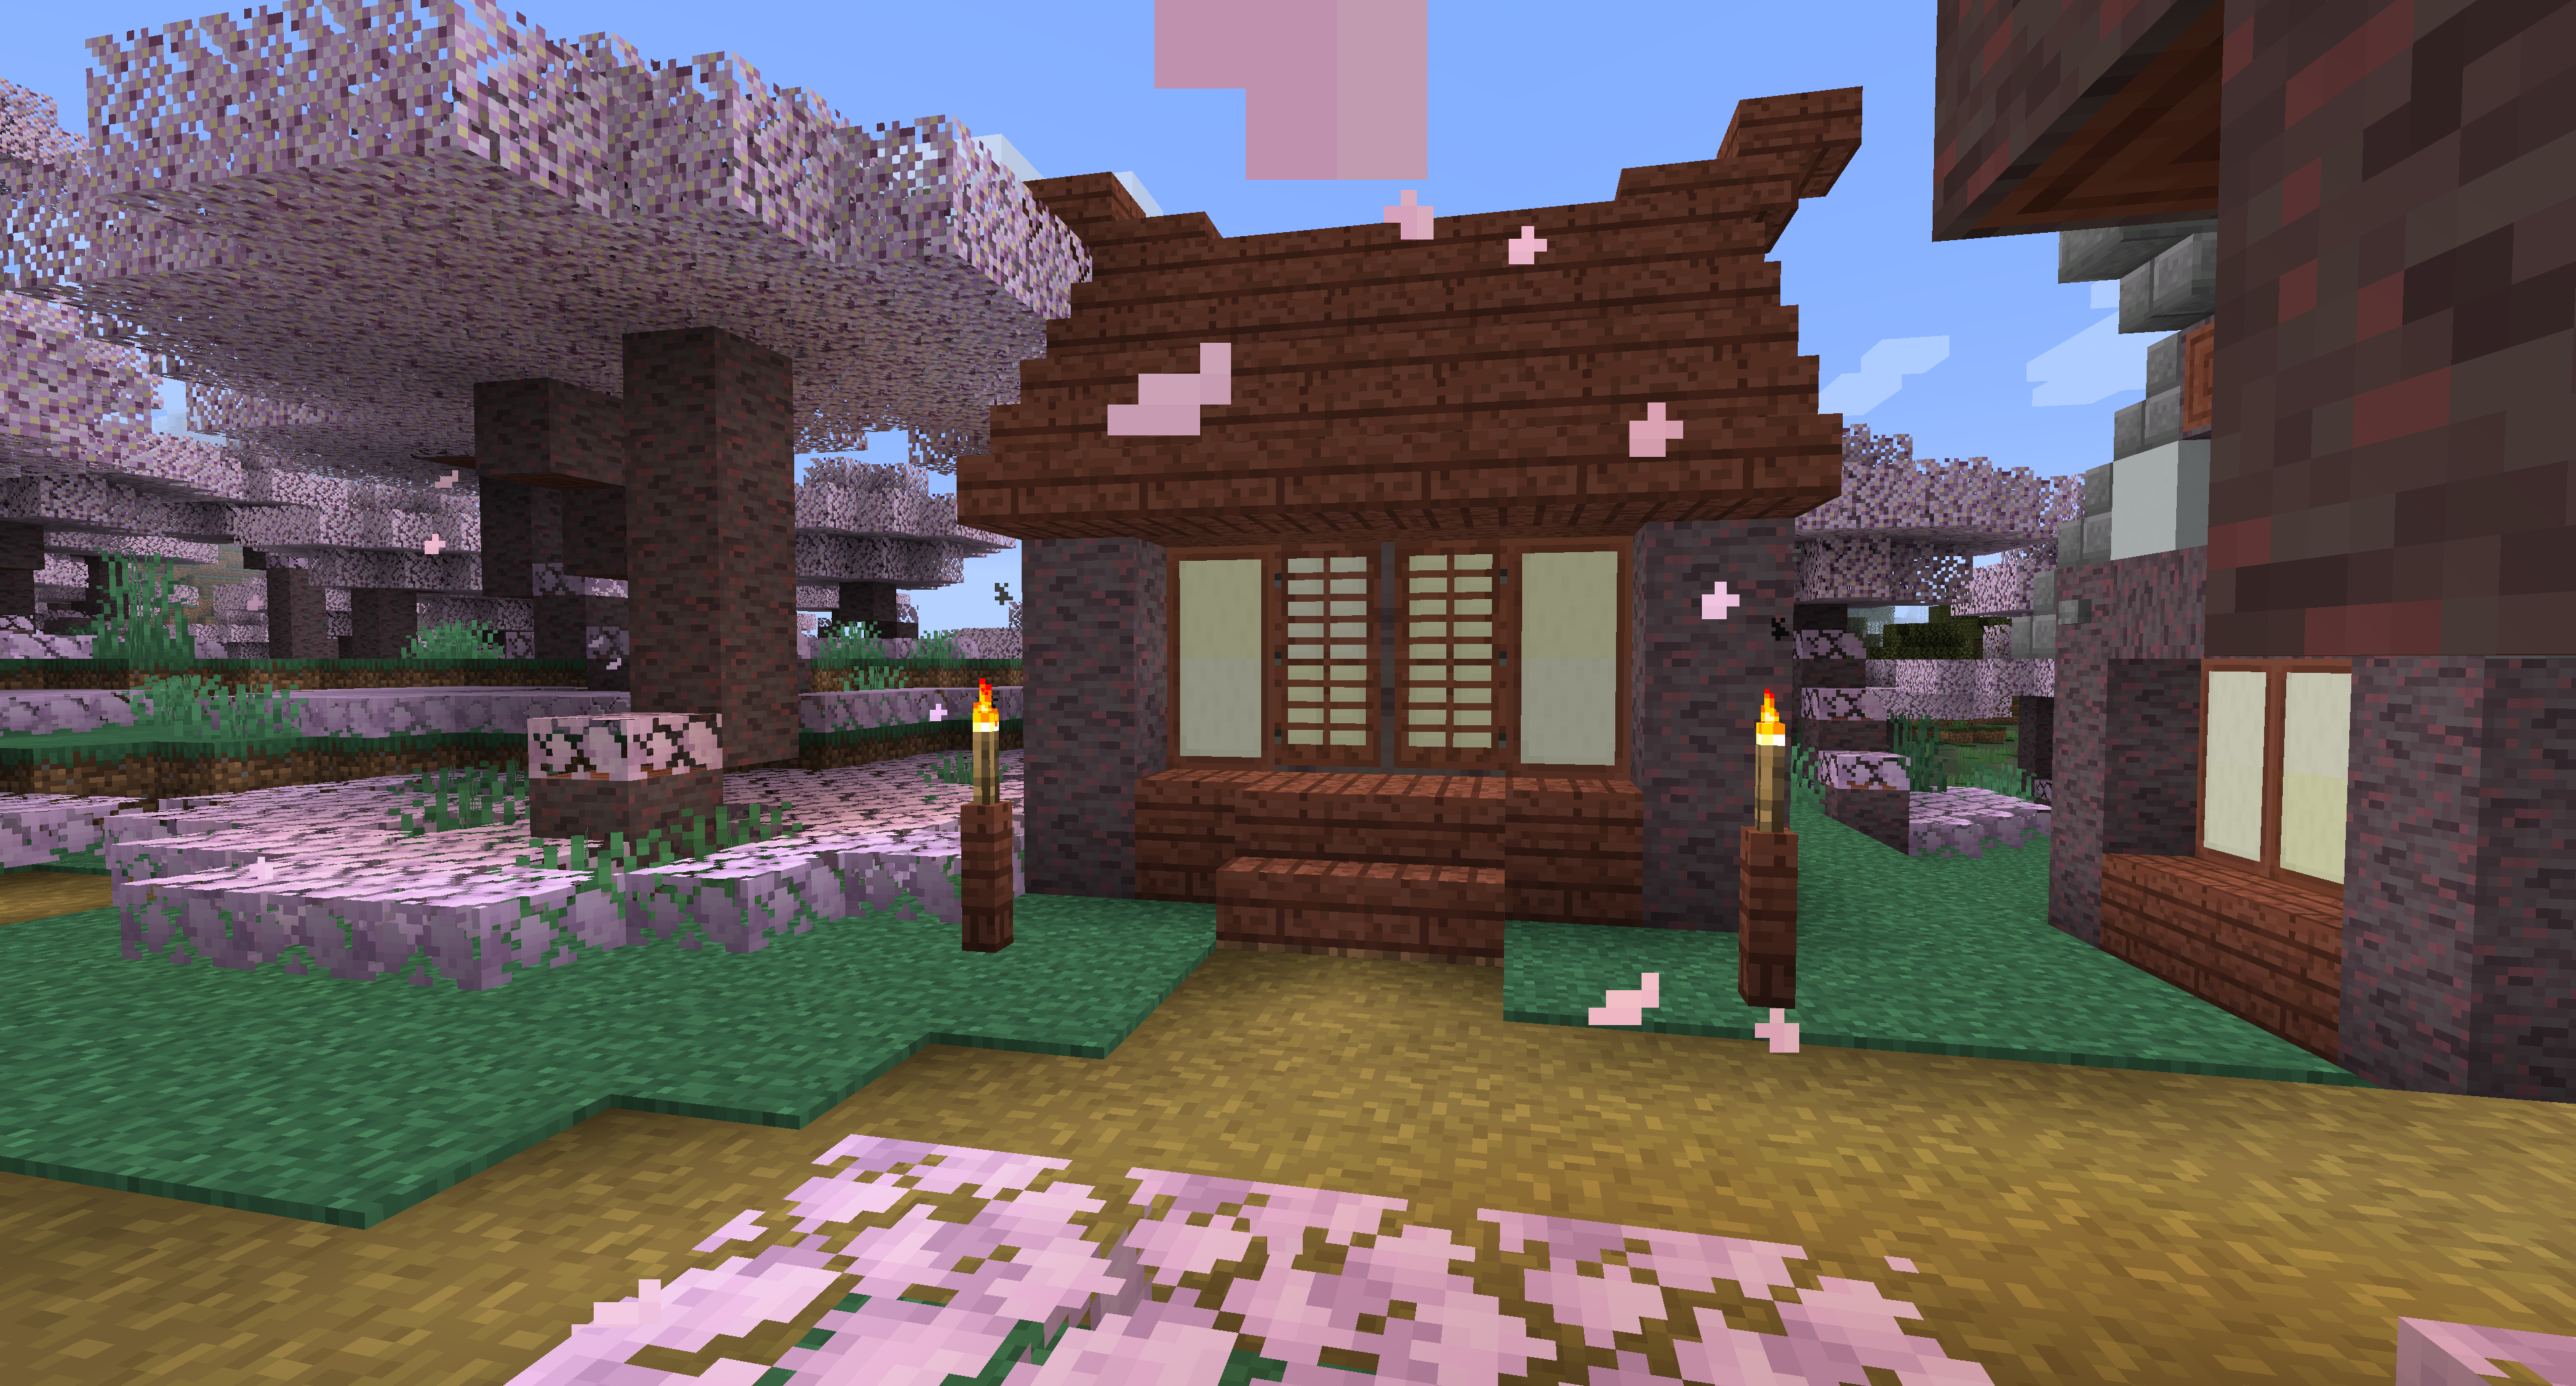 Another common hut design found in cherry blossom grotto villages